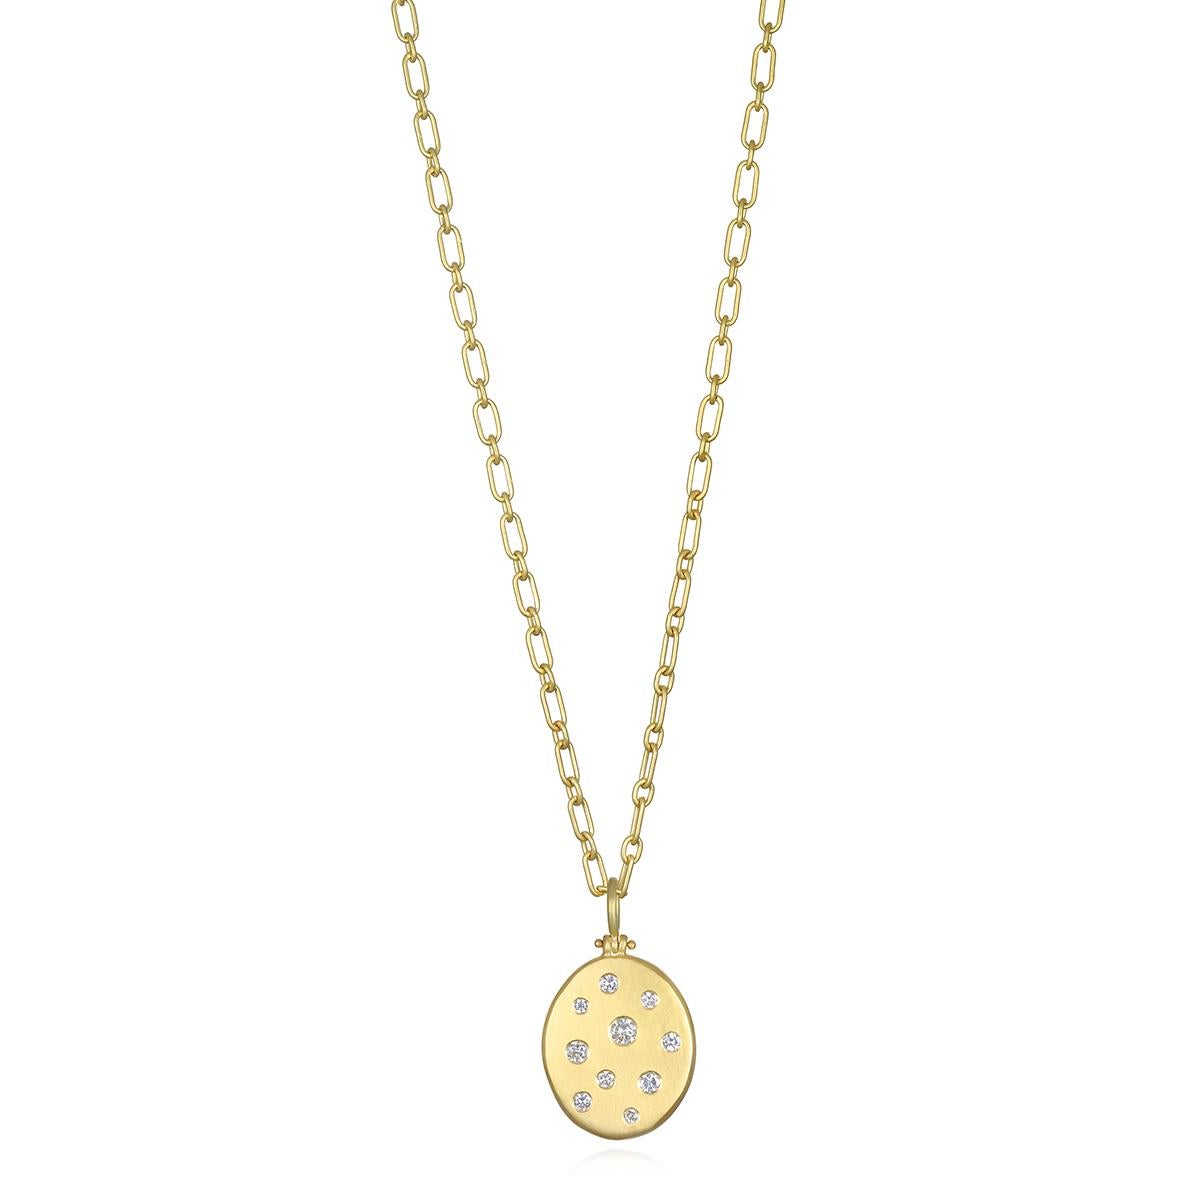 Versatile and easy to wear, Faye Kim's 18 Karat Gold Diamond Studded Large Dog Tag with its hinged bail and matte finish is perfect for every day. Perfect for any occasion, this piece can be worn alone or layered and will elevate your style to